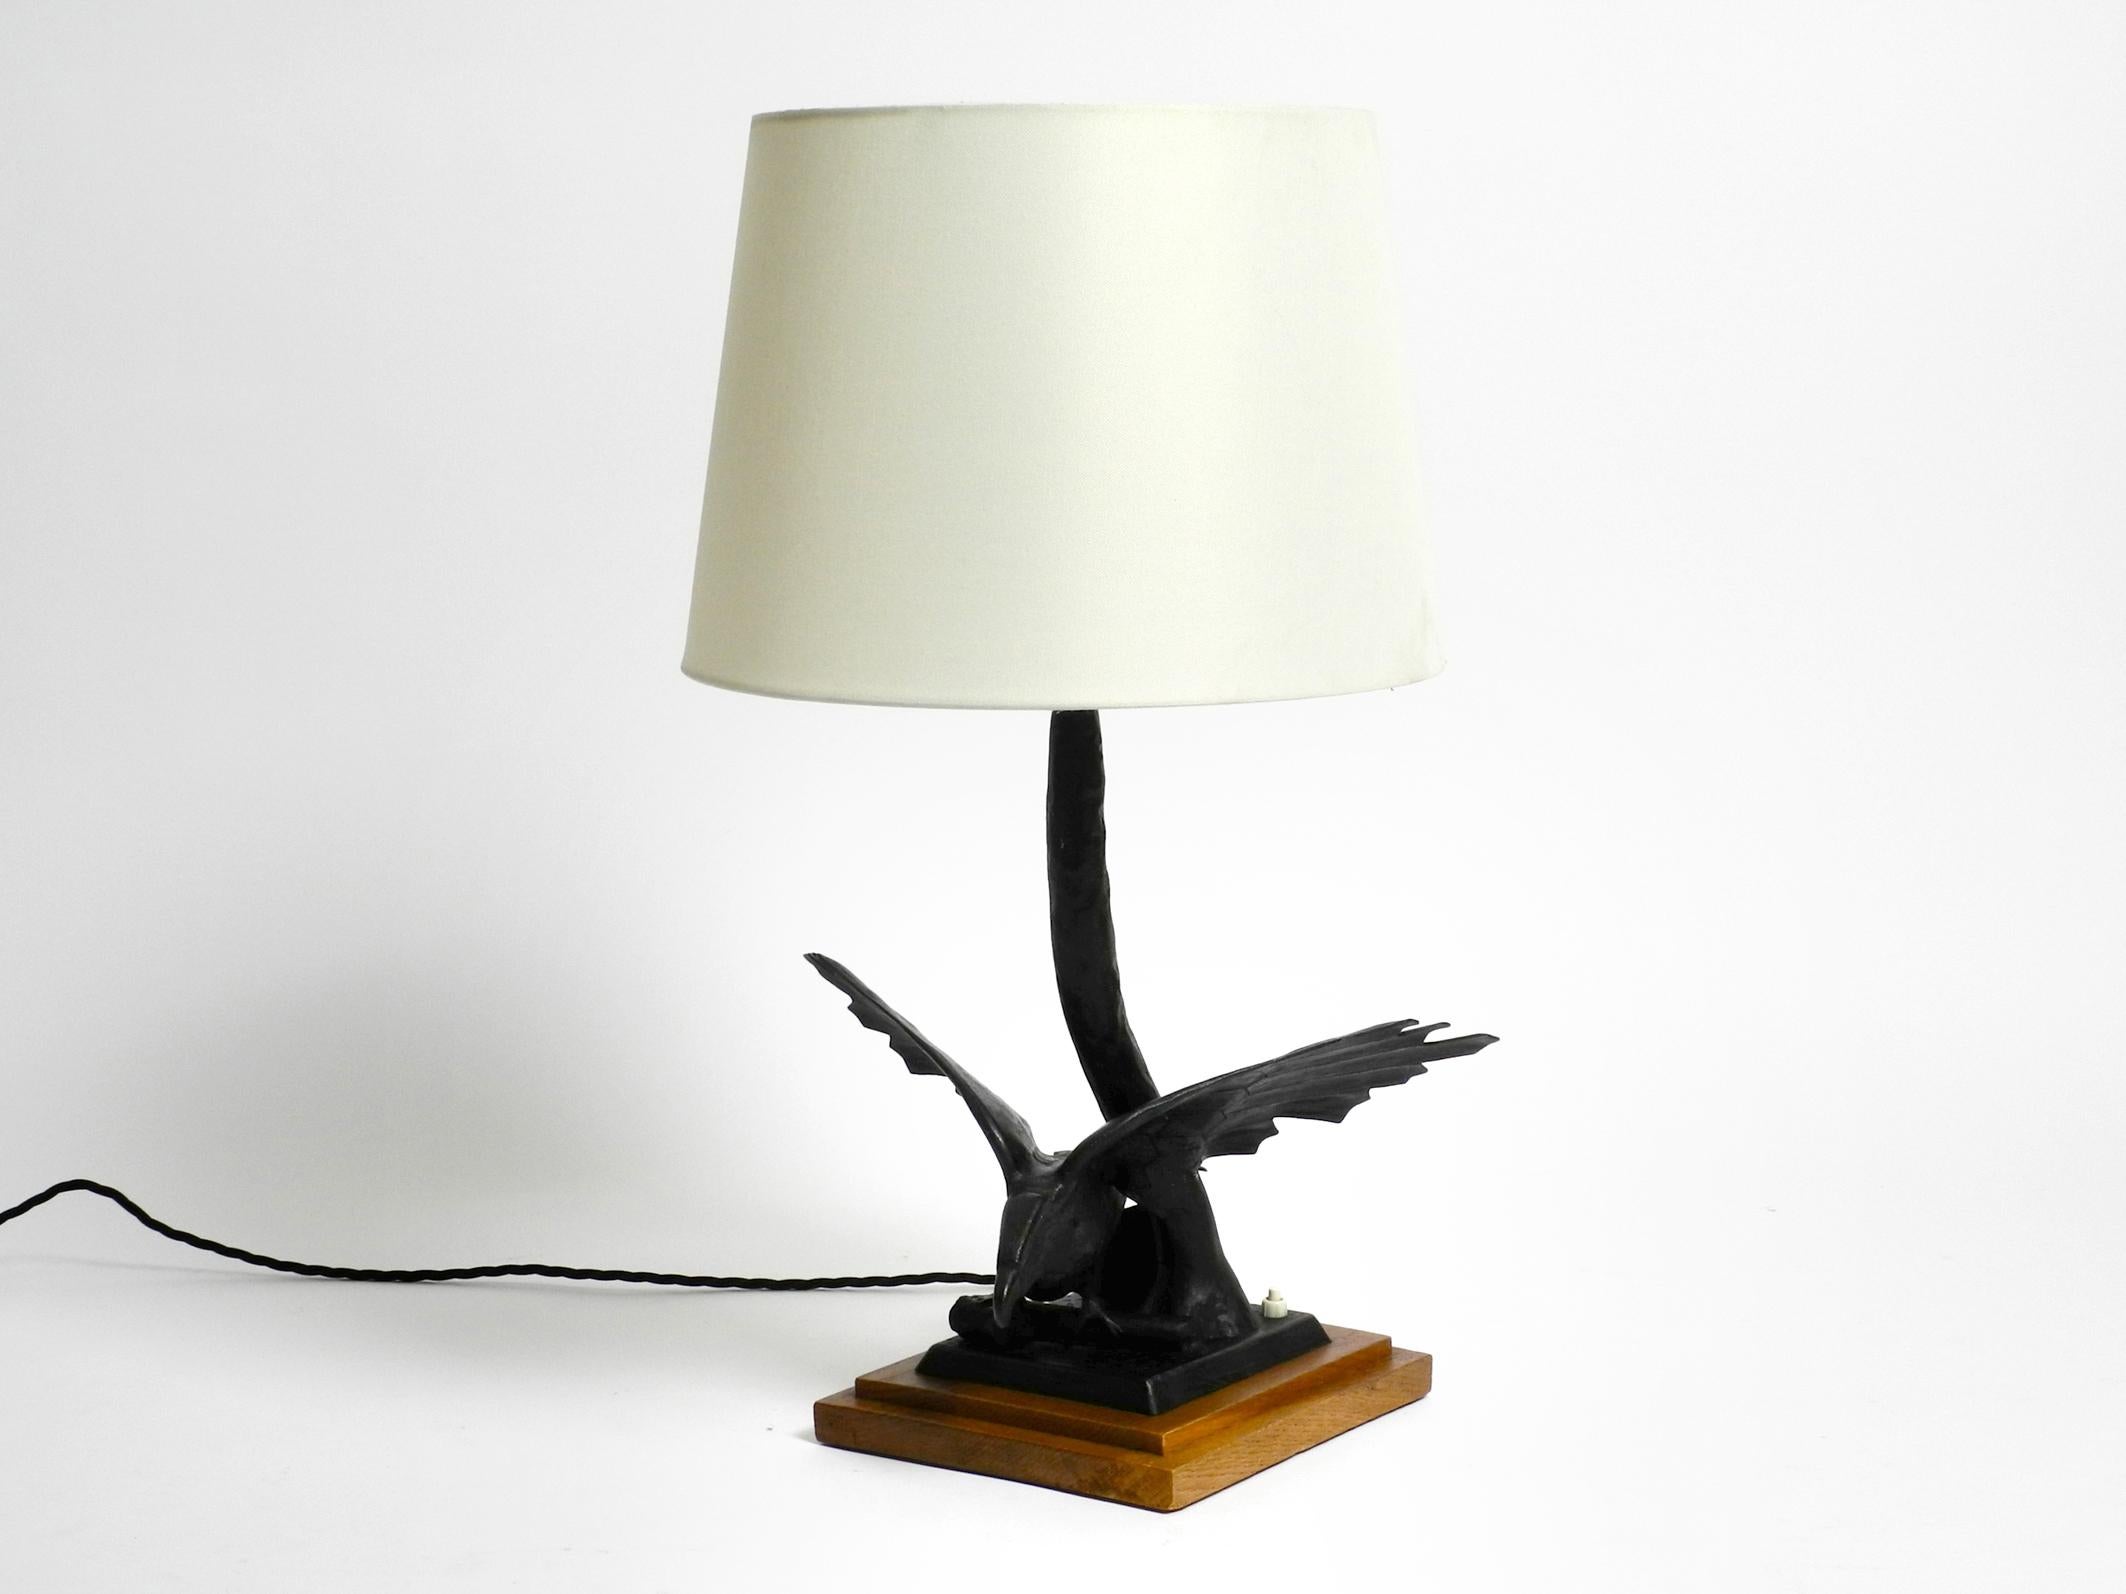 Very elegant large 1940s iron table lamp in the shape of an eagle with a teak base.
Great pre-war design. The complete eagle is made of iron in black.
Most likely from an Italian production.
Without damages to the eagle and original wooden